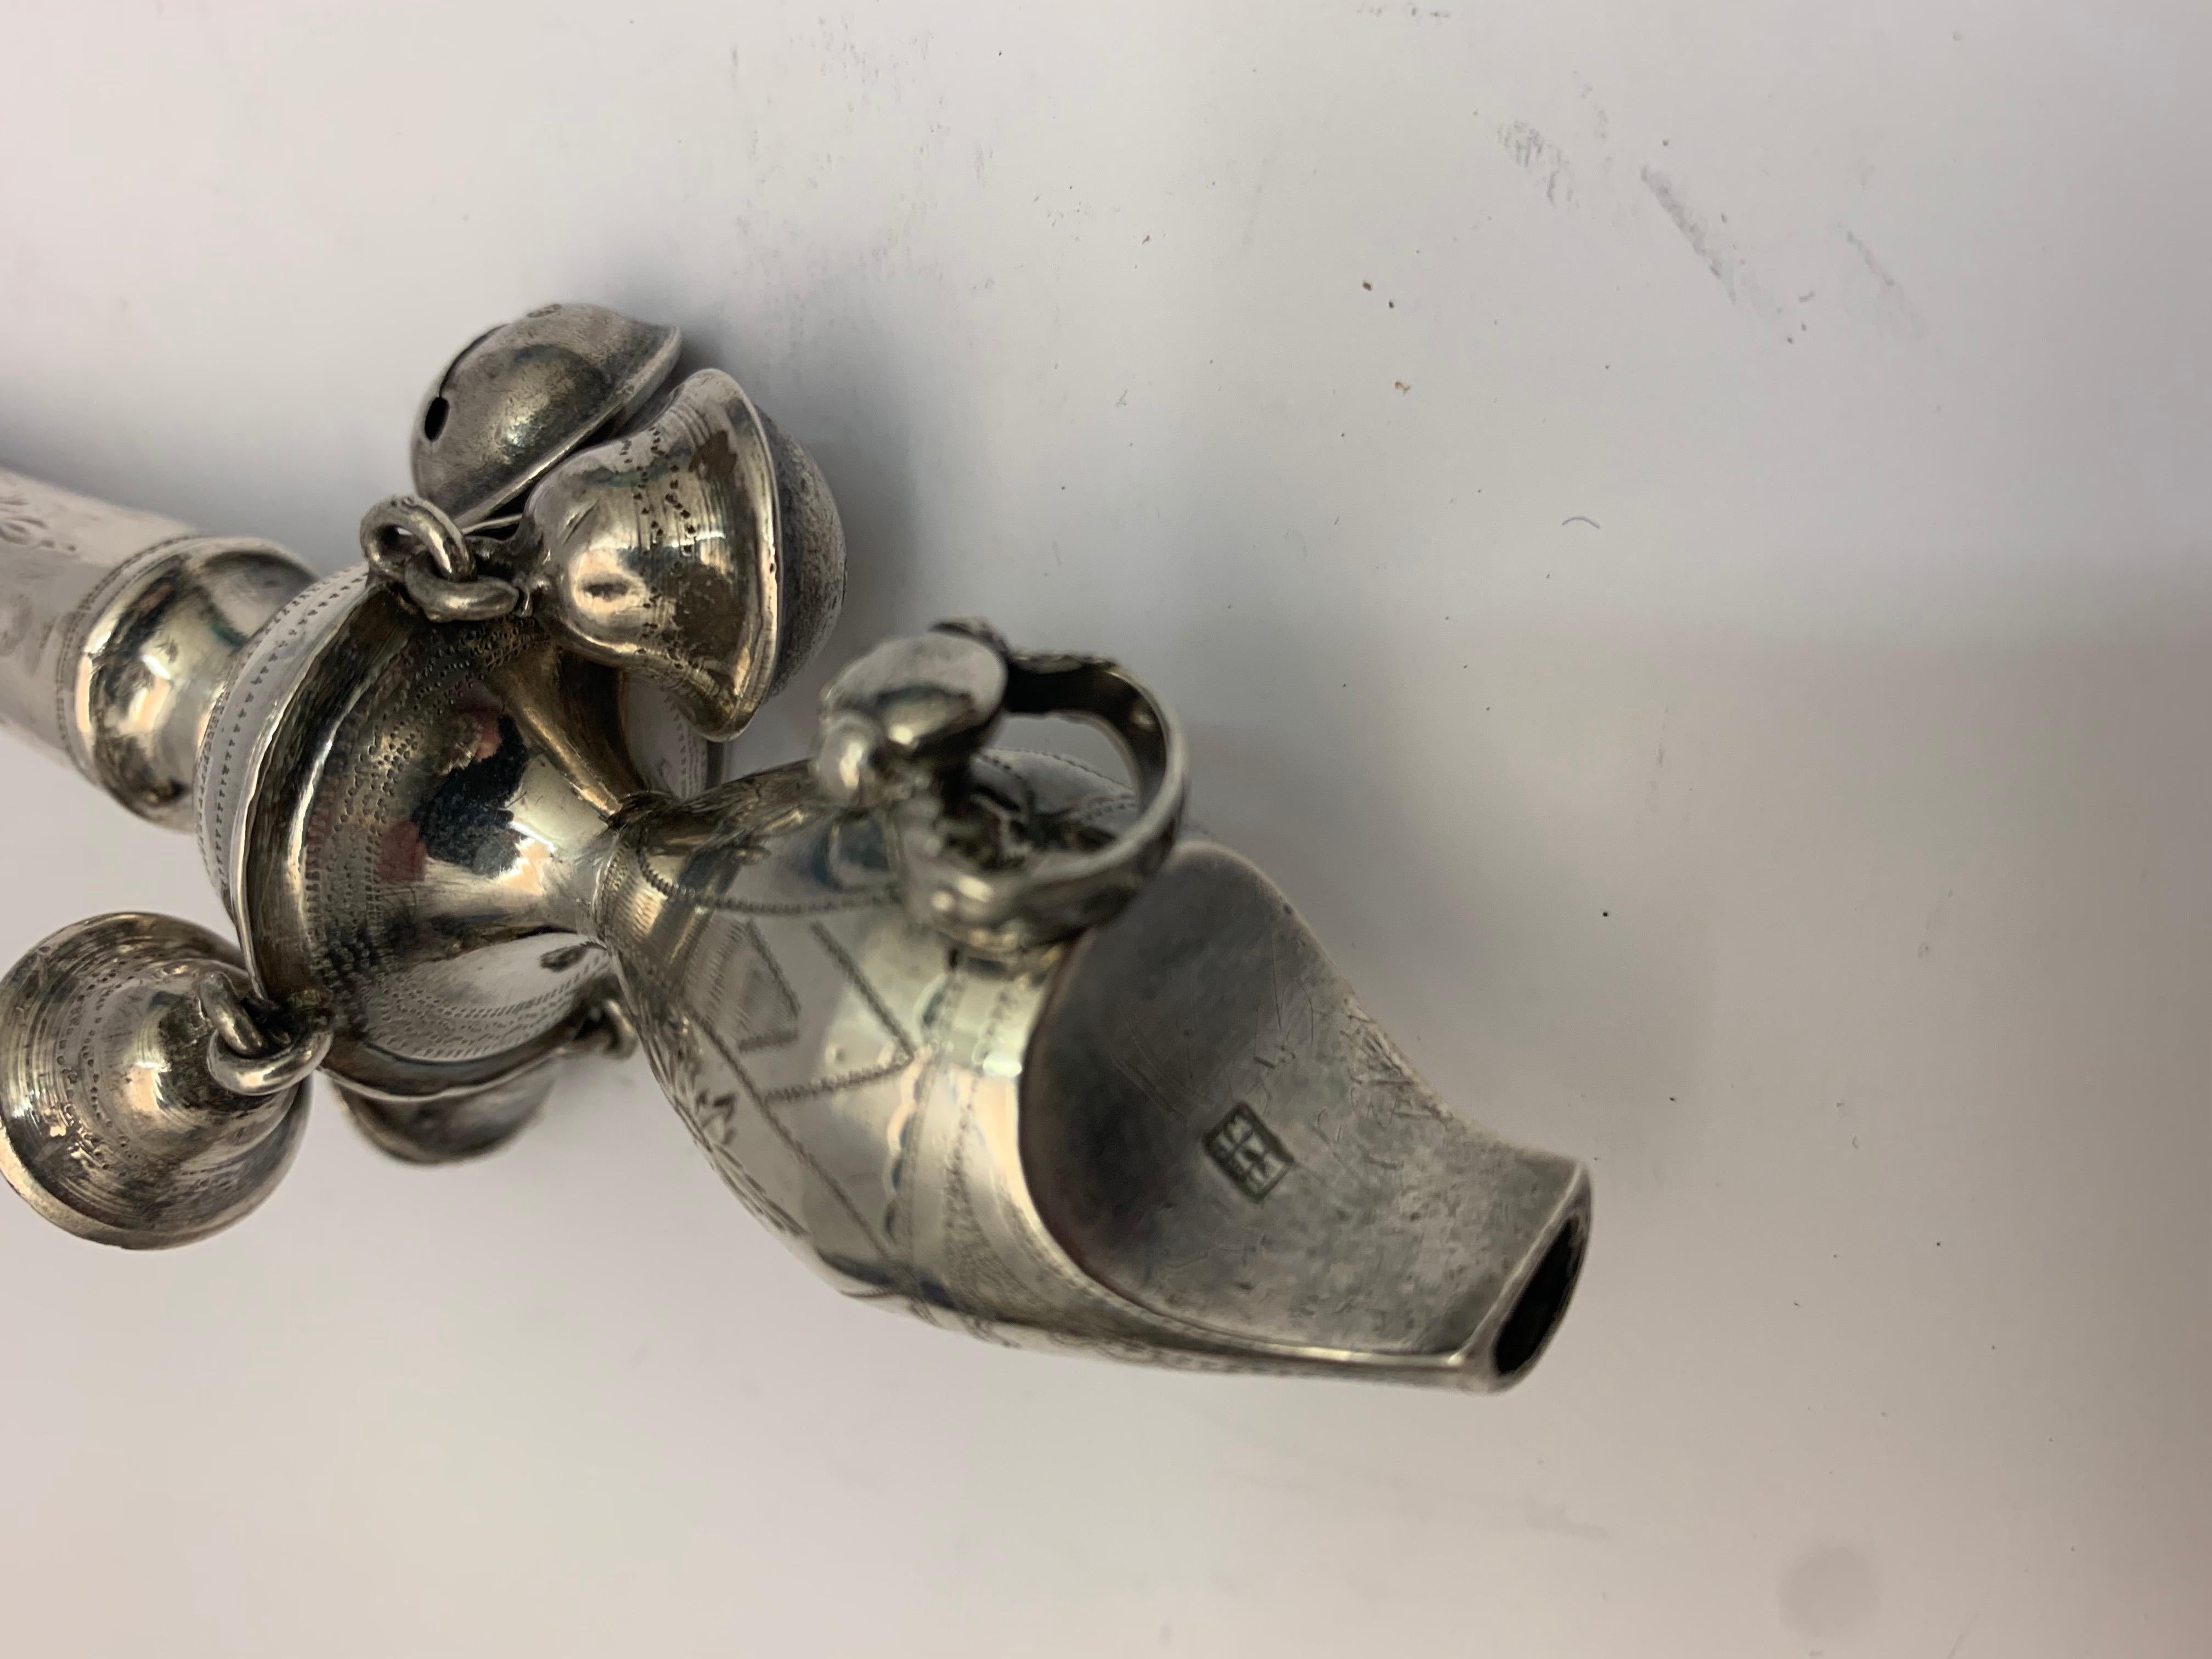 Antique Silver Rattle Made by Peter and Ann Bateman, circa 1800 In Good Condition For Sale In London, London